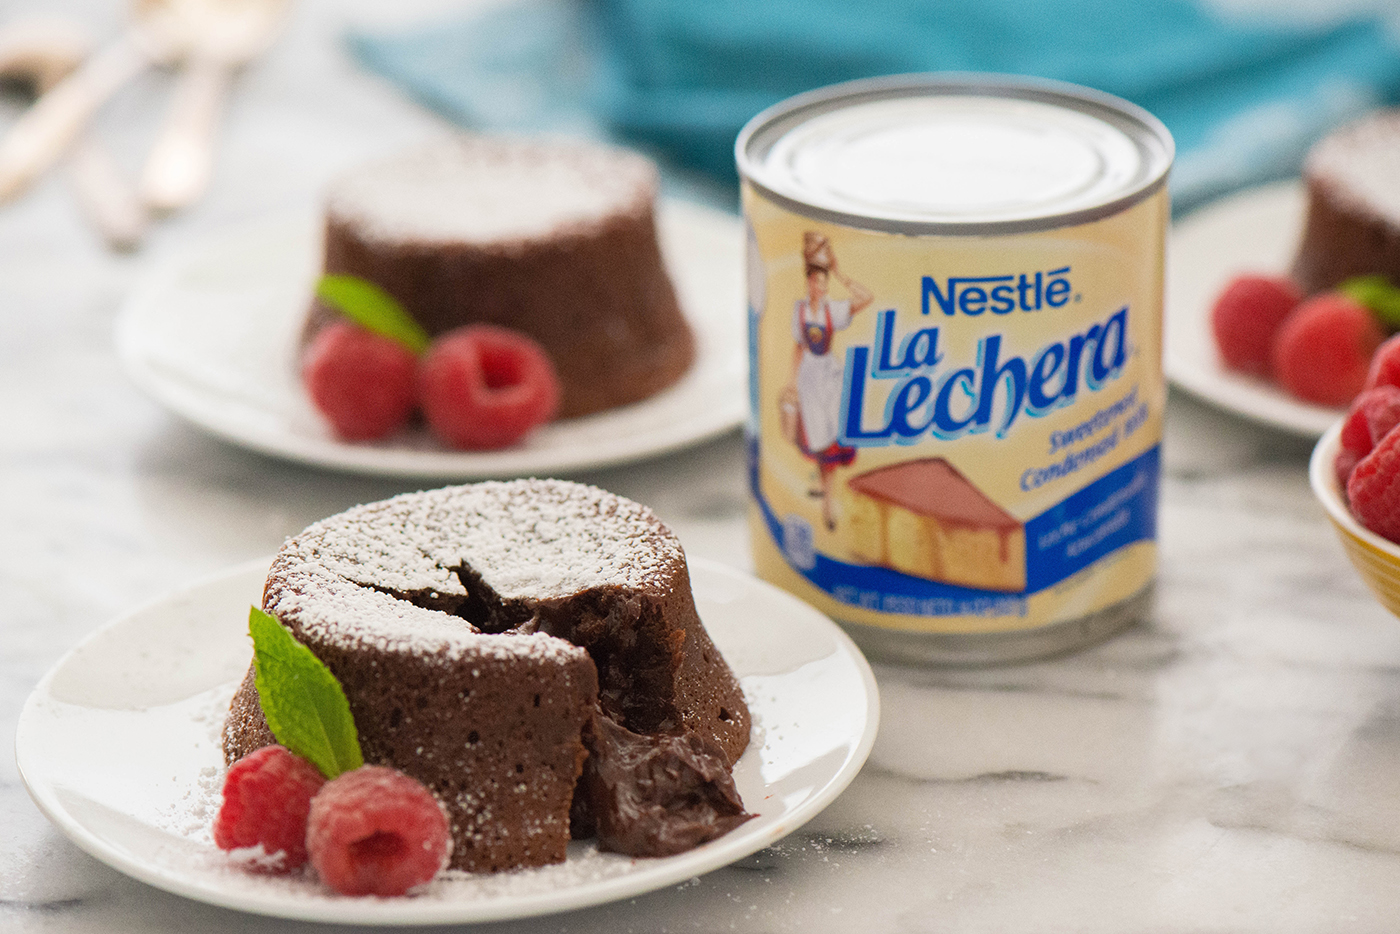 Mexican Chocolate Lava Cakes